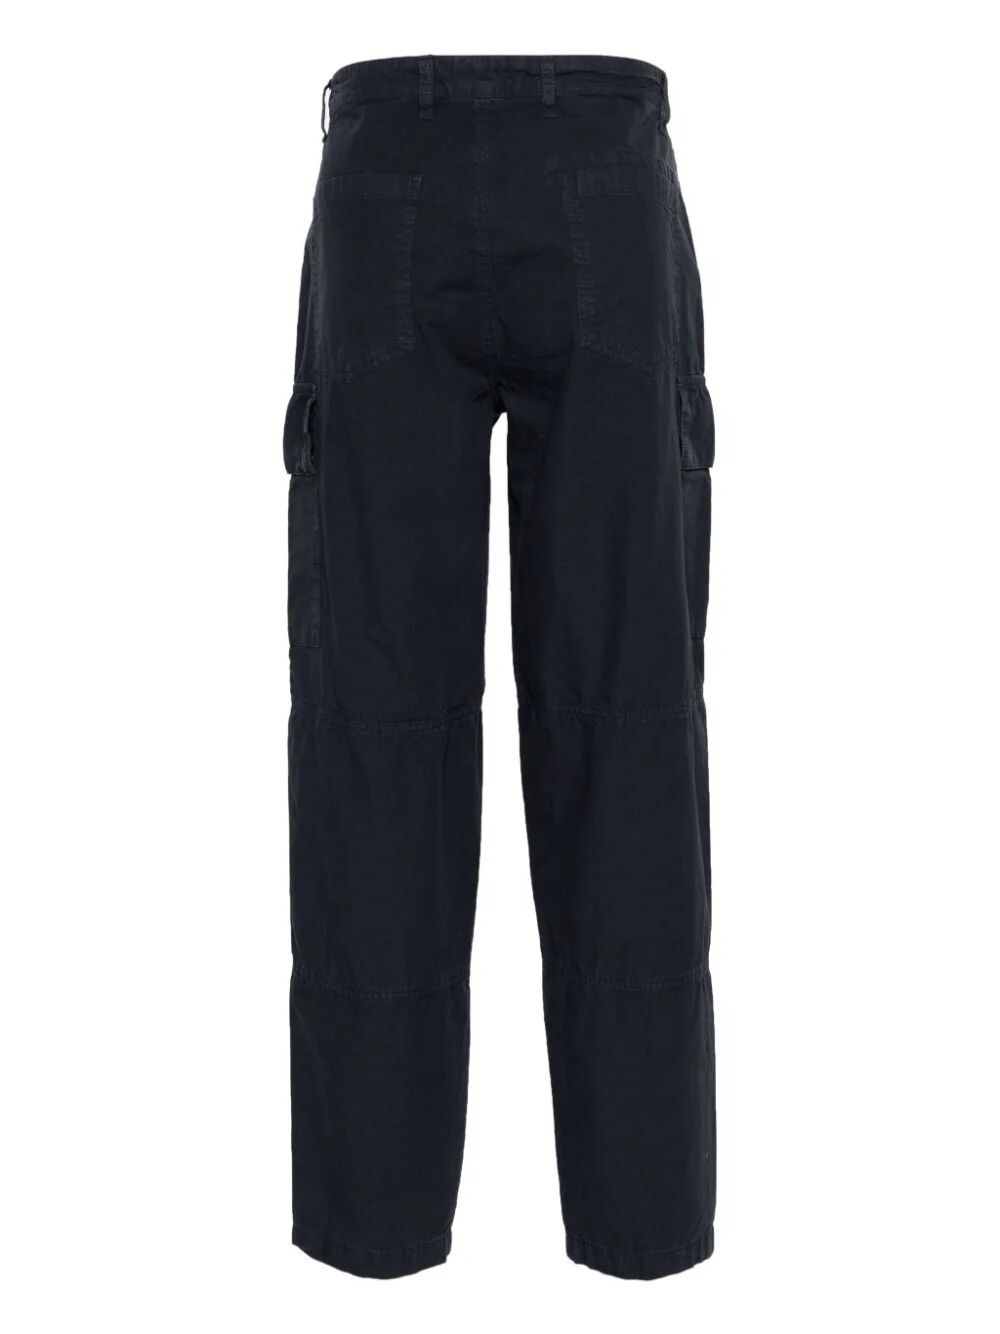 ESSENTIAL RIPSTOP CARGO TROUSERS - 5